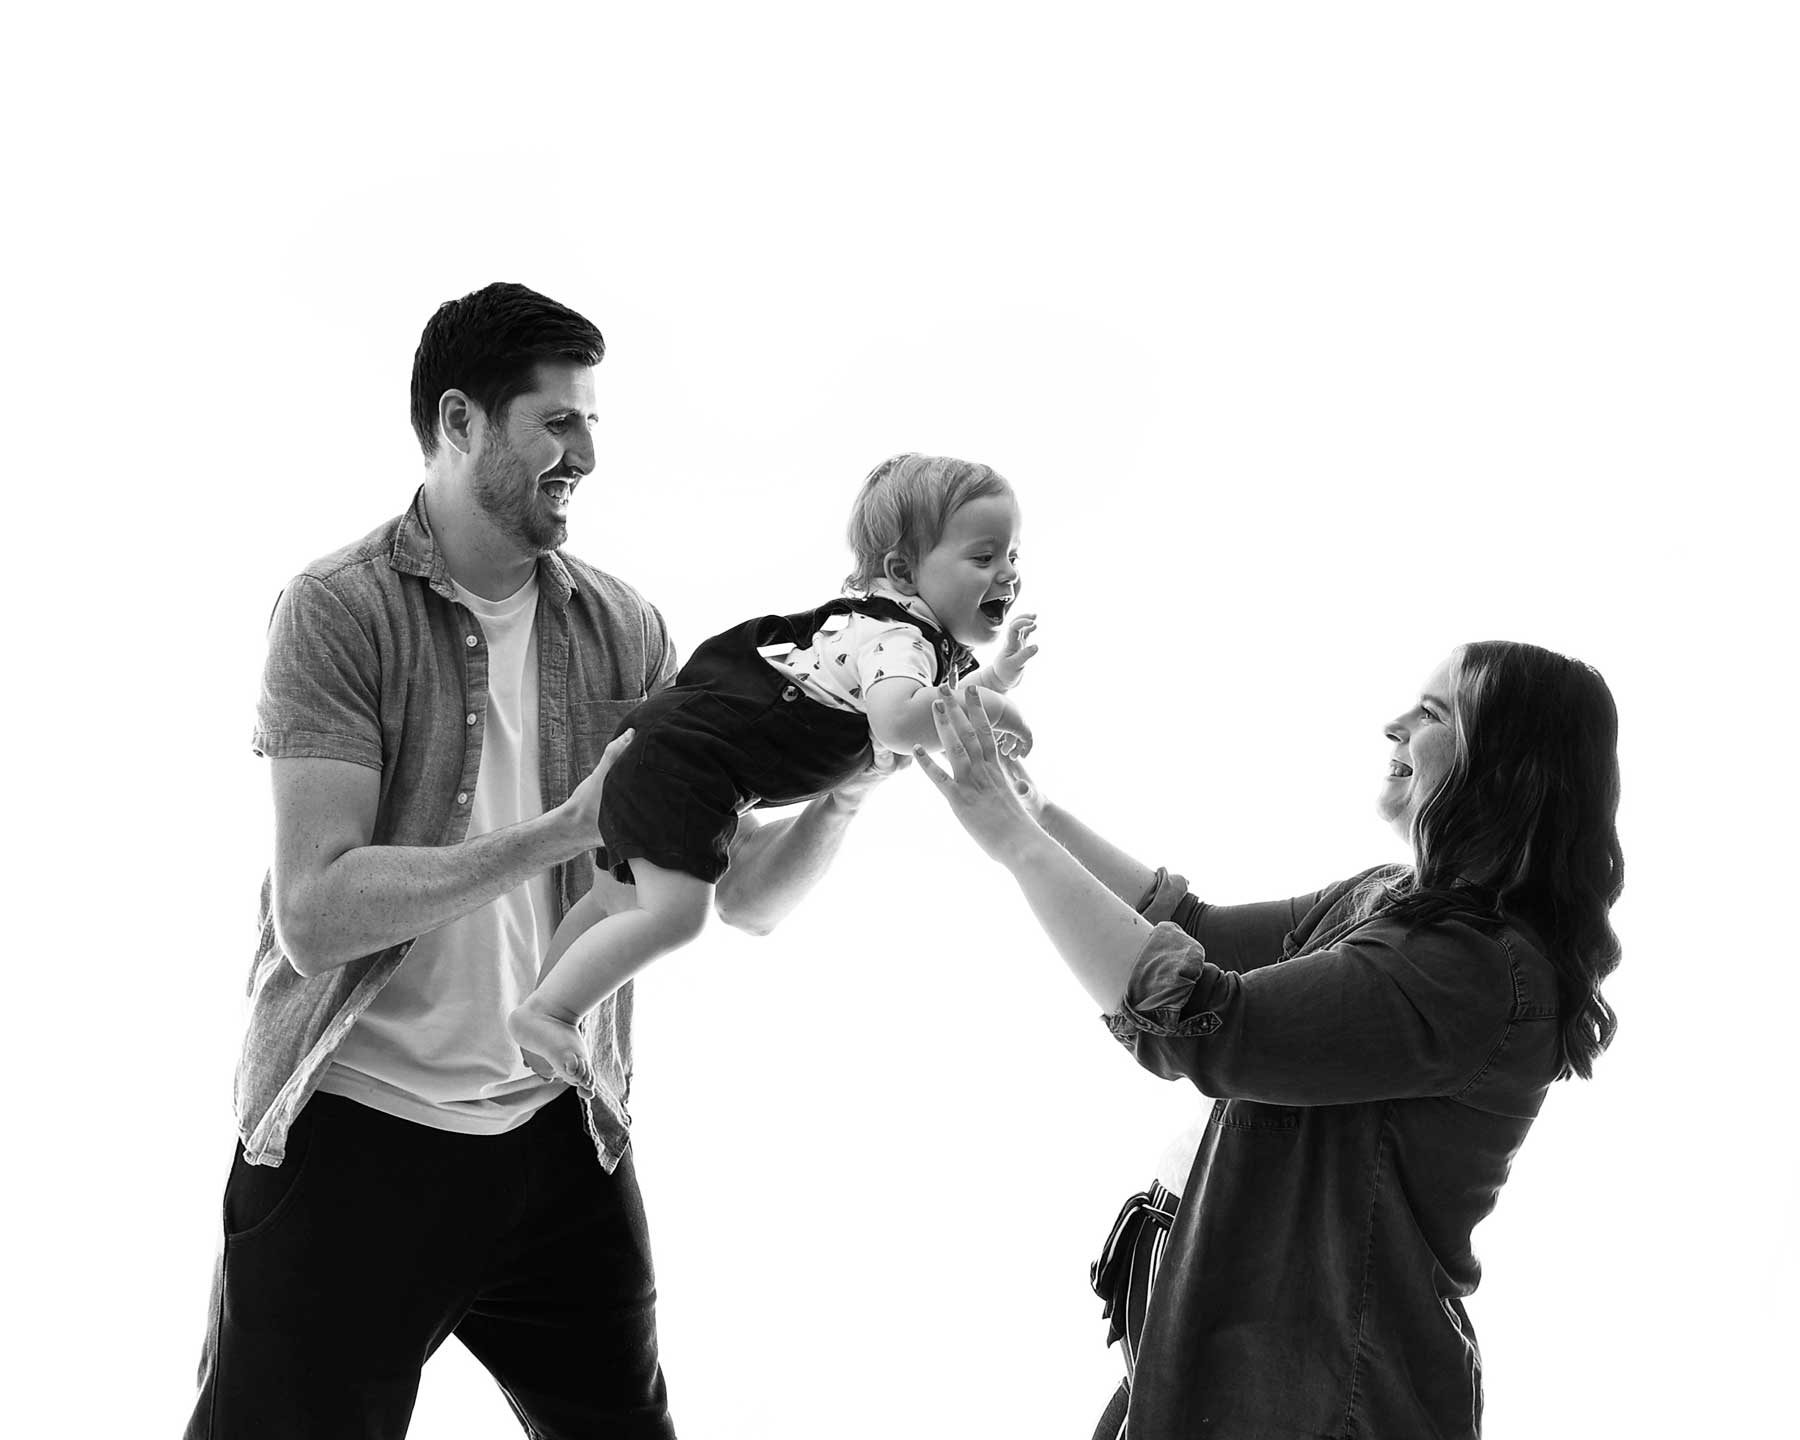 mum, dad and baby portrait on white background in black and white